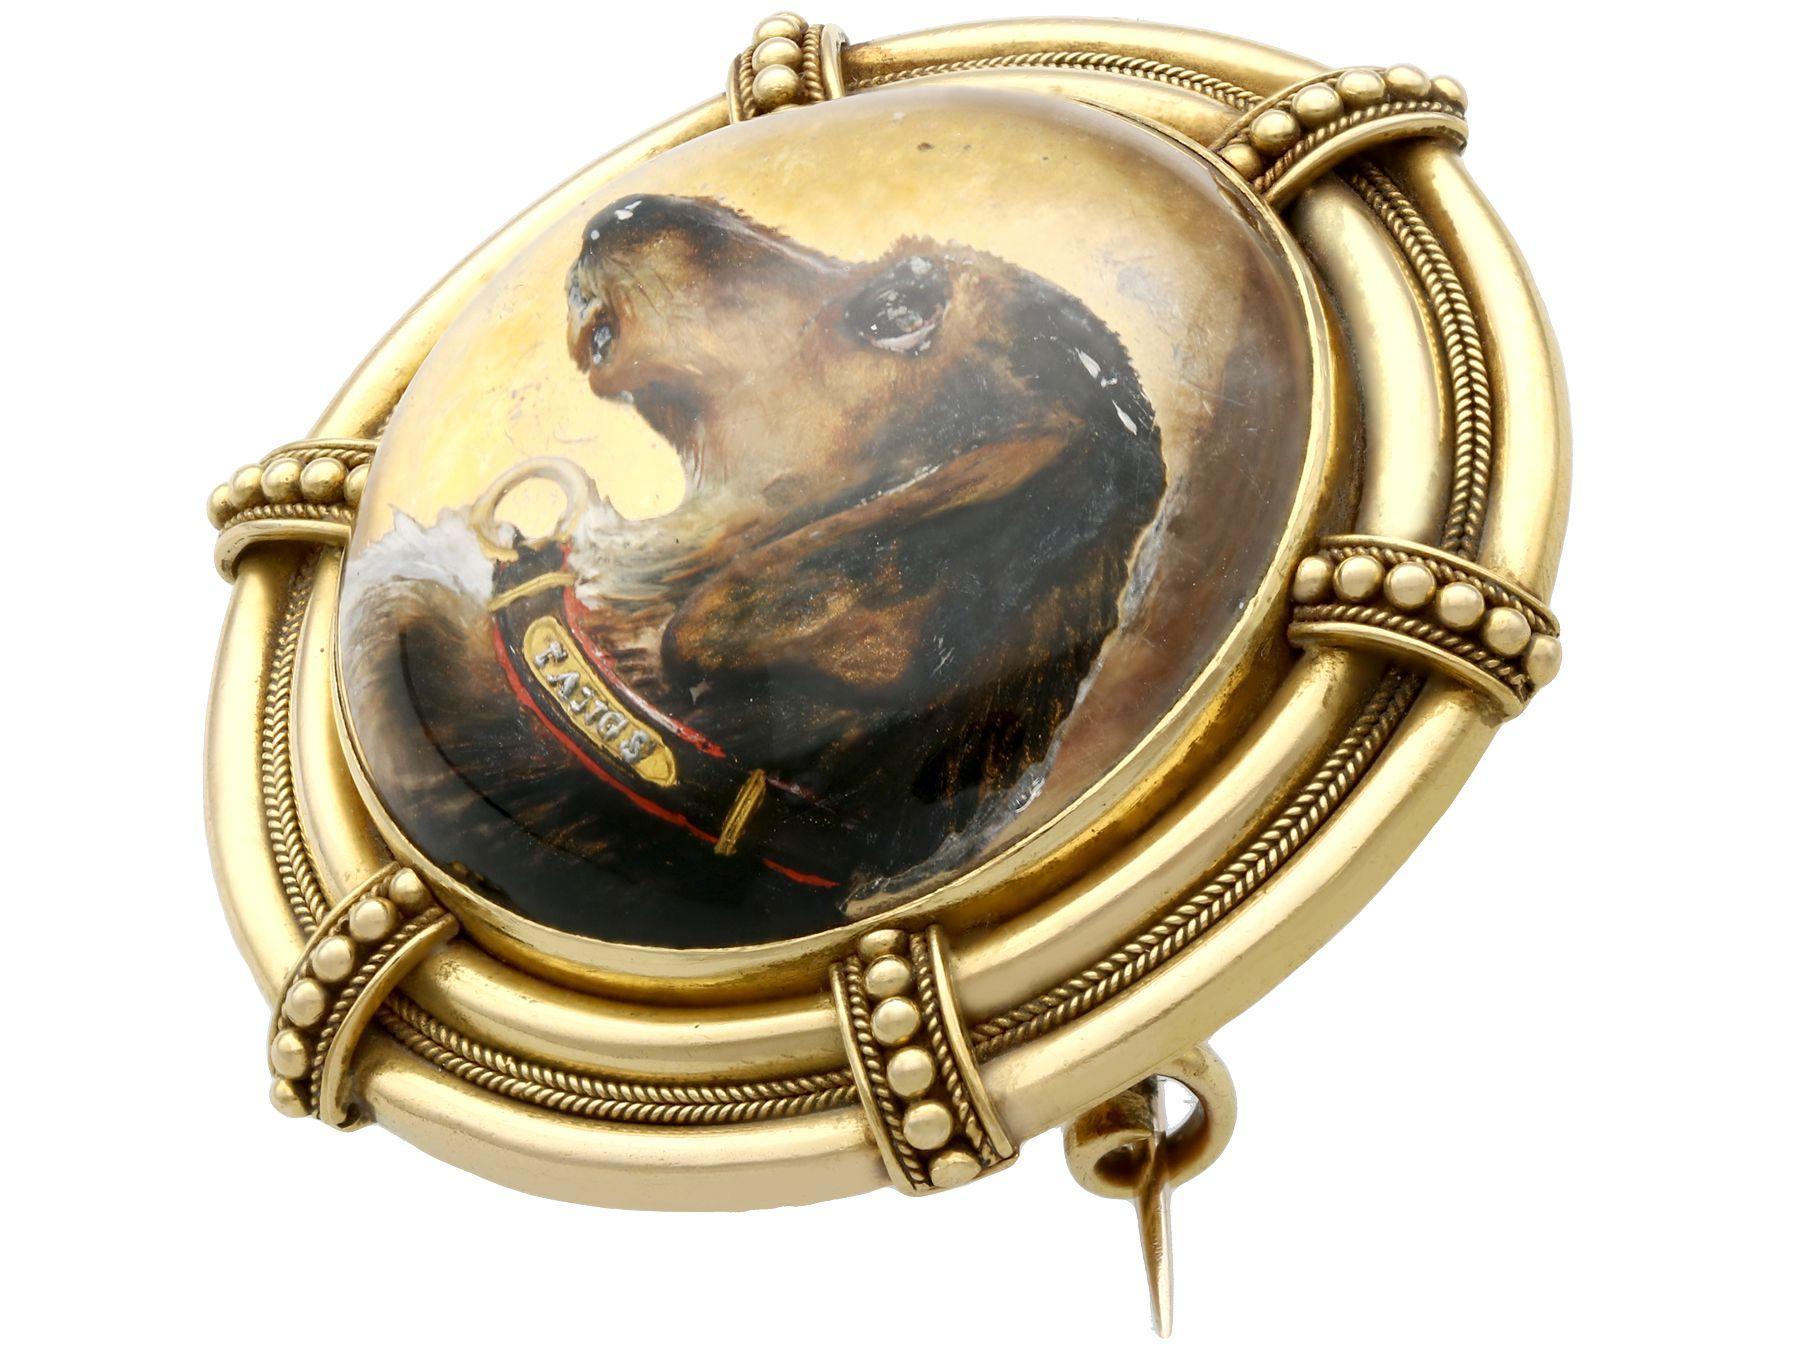 A stunning, fine and impressive antique Essex crystal and 18 karat yellow gold dog brooch; part of our antique estate jewelry collections.

This stunning, fine and impressive Essex crystal Victorian brooch has been crafted in 18k yellow gold.

The